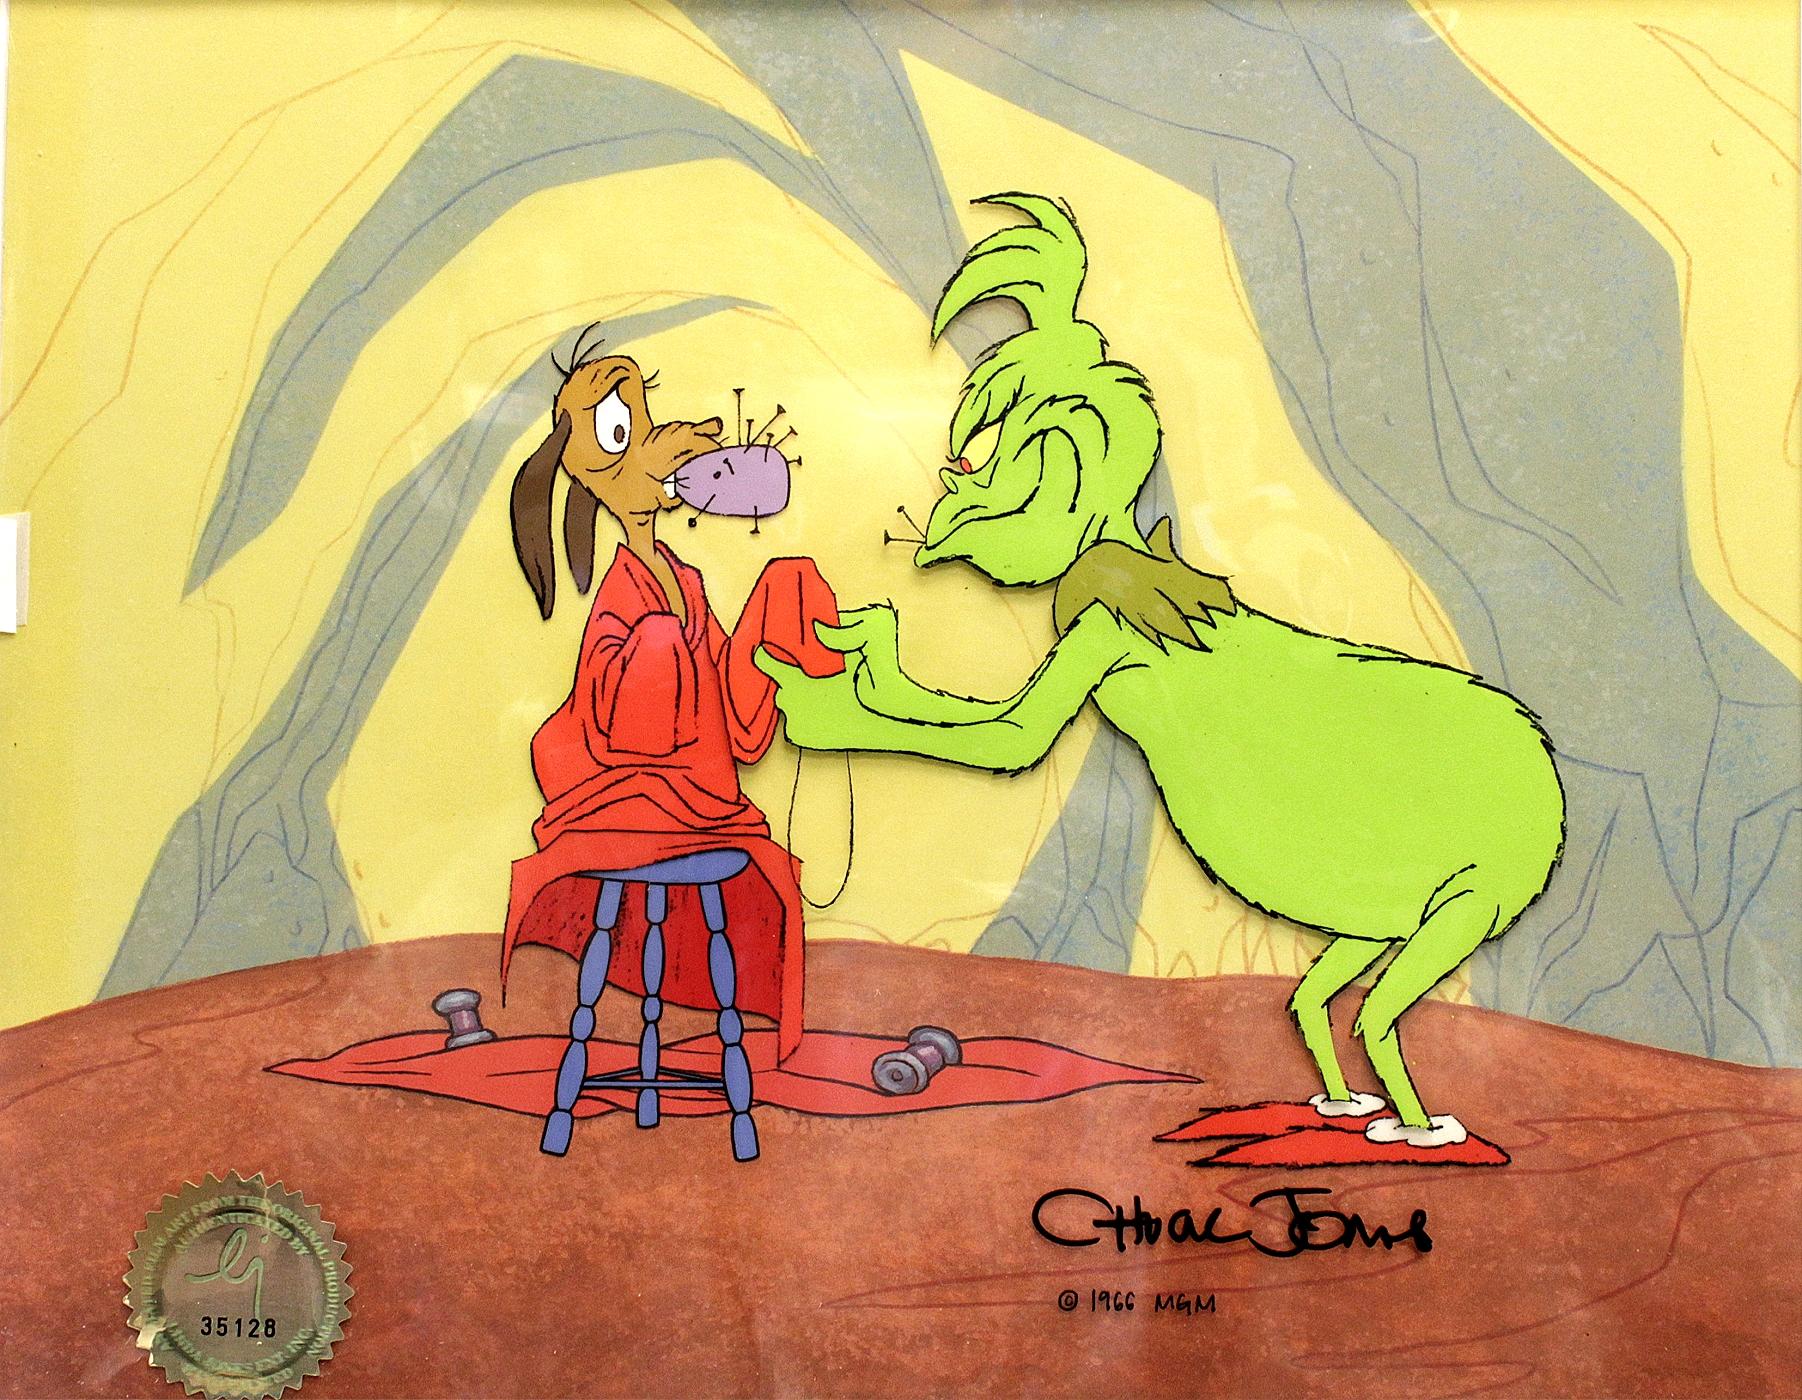 Artist: Geisel, Theodore: (Dr. Seuss) ( Chuck Jones )

Title: How The Grinch Stole Christmas (Original 1966 production cell)

Publisher: MGM - Warner Brothers Studios, (1966)

Description: an original production 2 cel setup of the Grinch and Max.